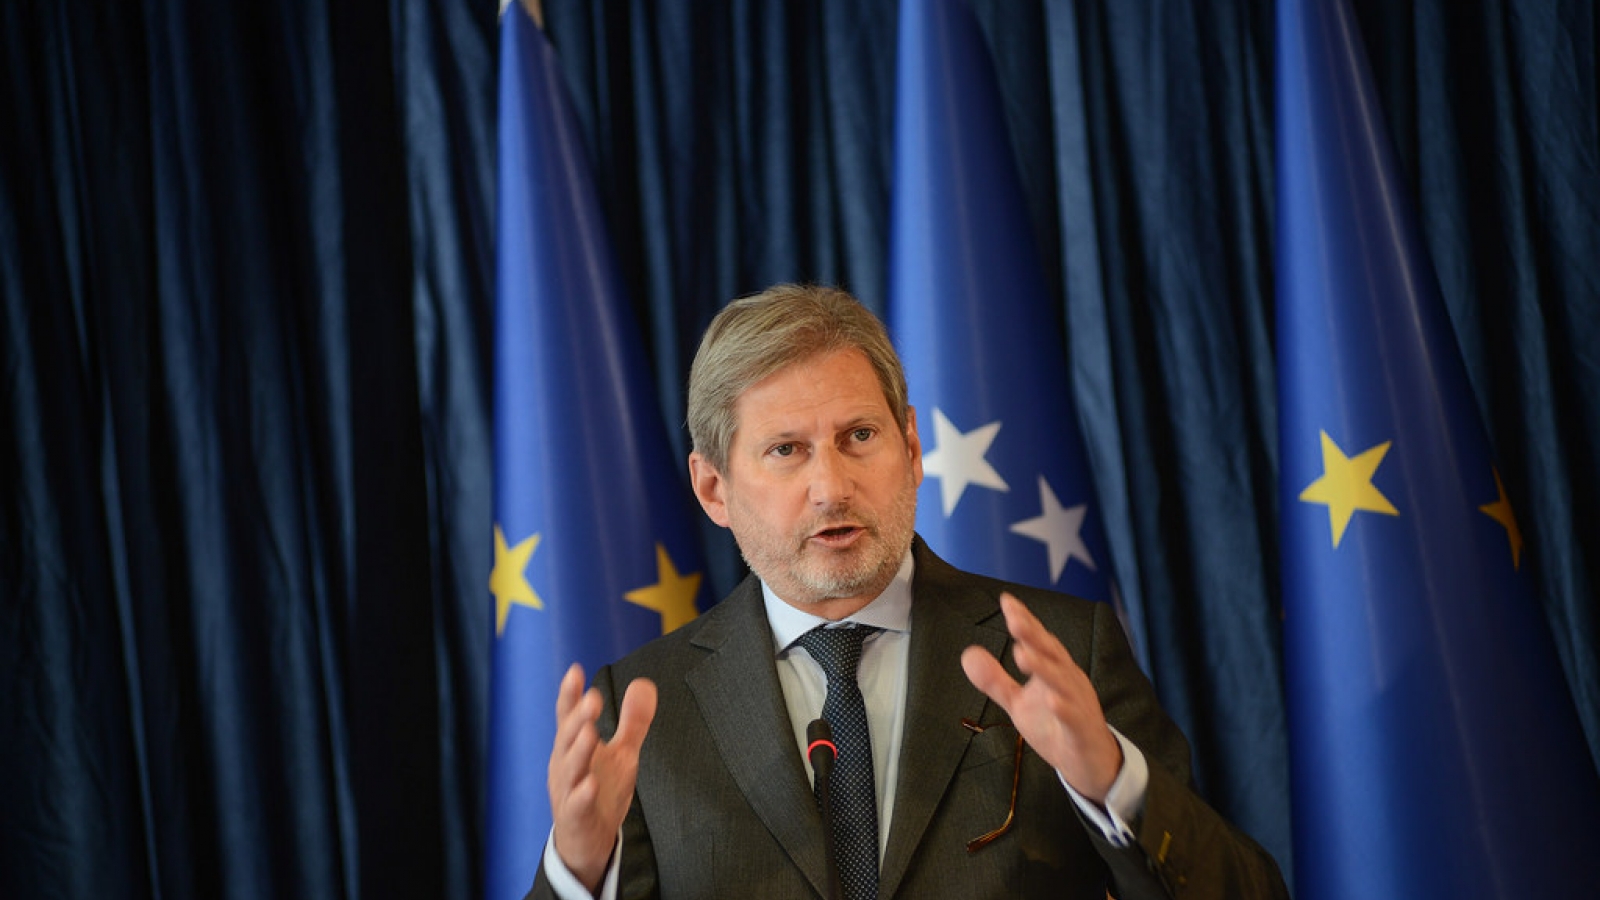 Commissioner Hahn: Education a key priority for the Eastern Partnership